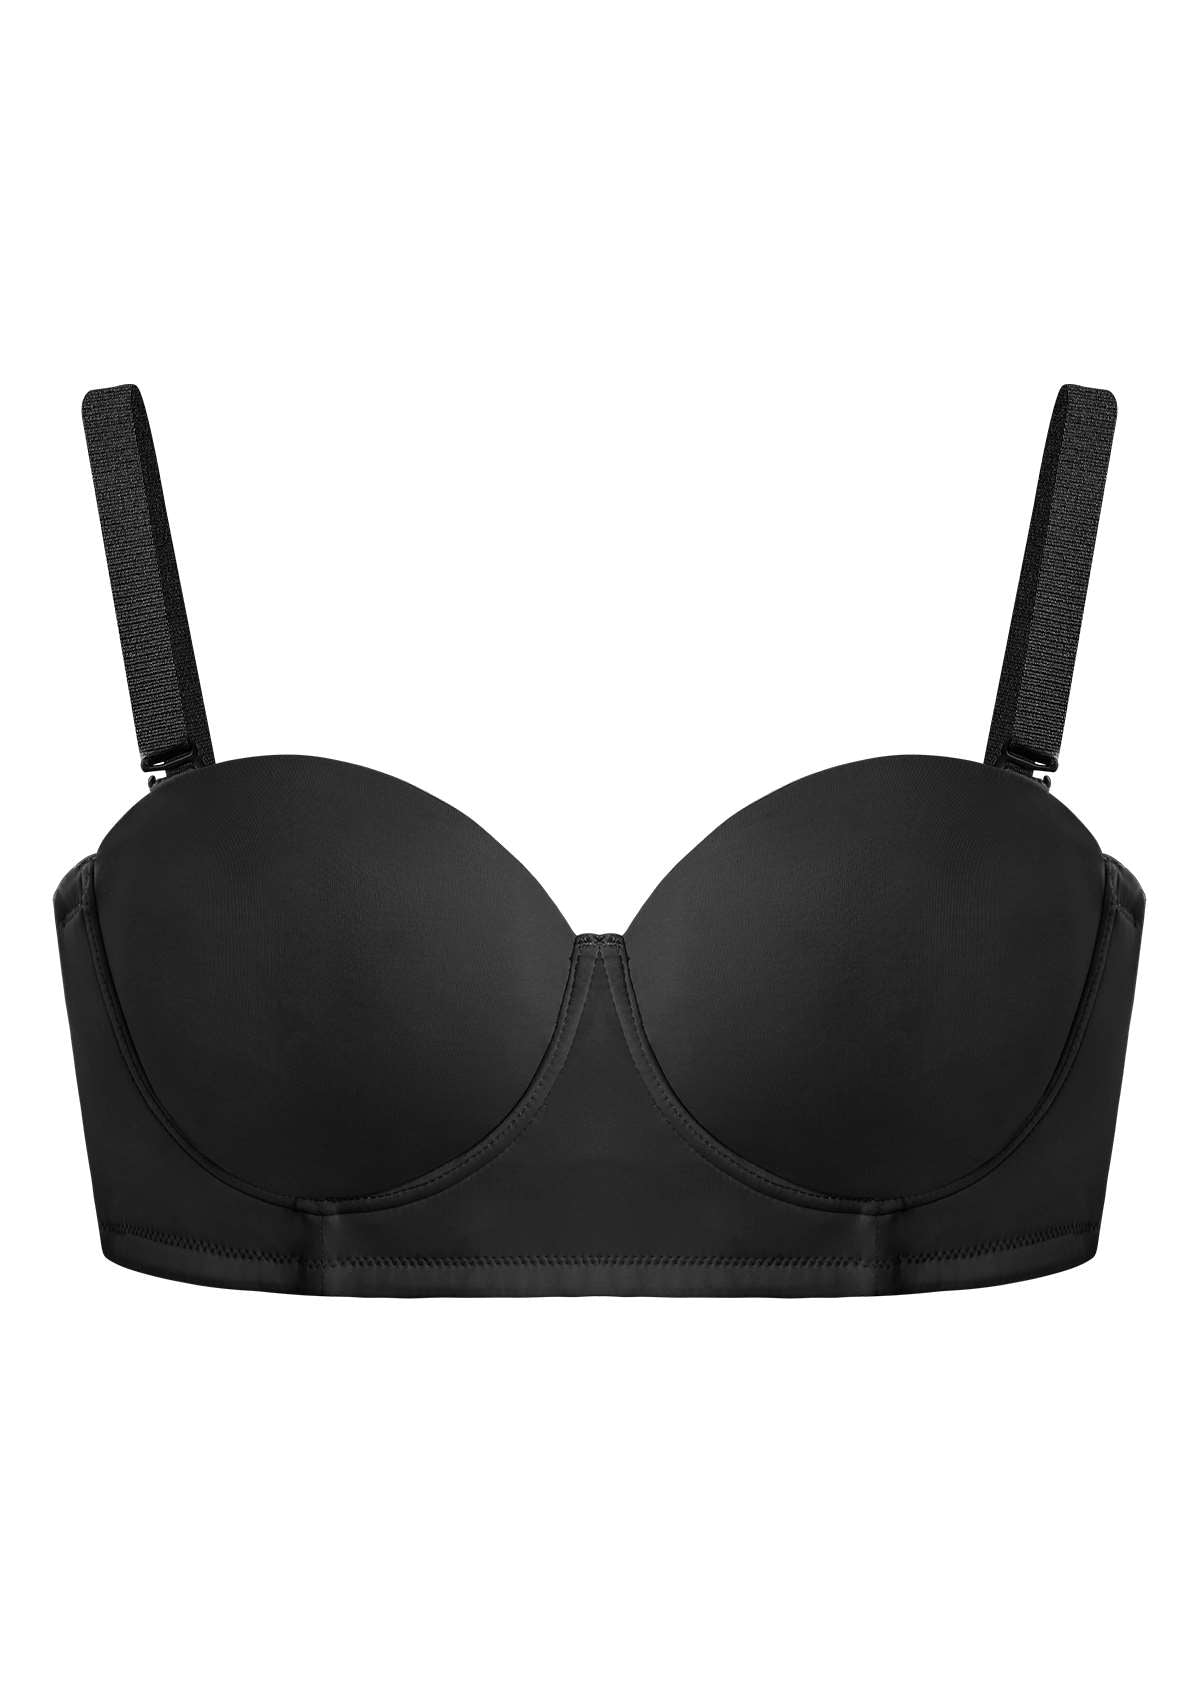 HSIA Margaret Molded Convertible Multiway Classic Strapless Bra - Black / 38 / H